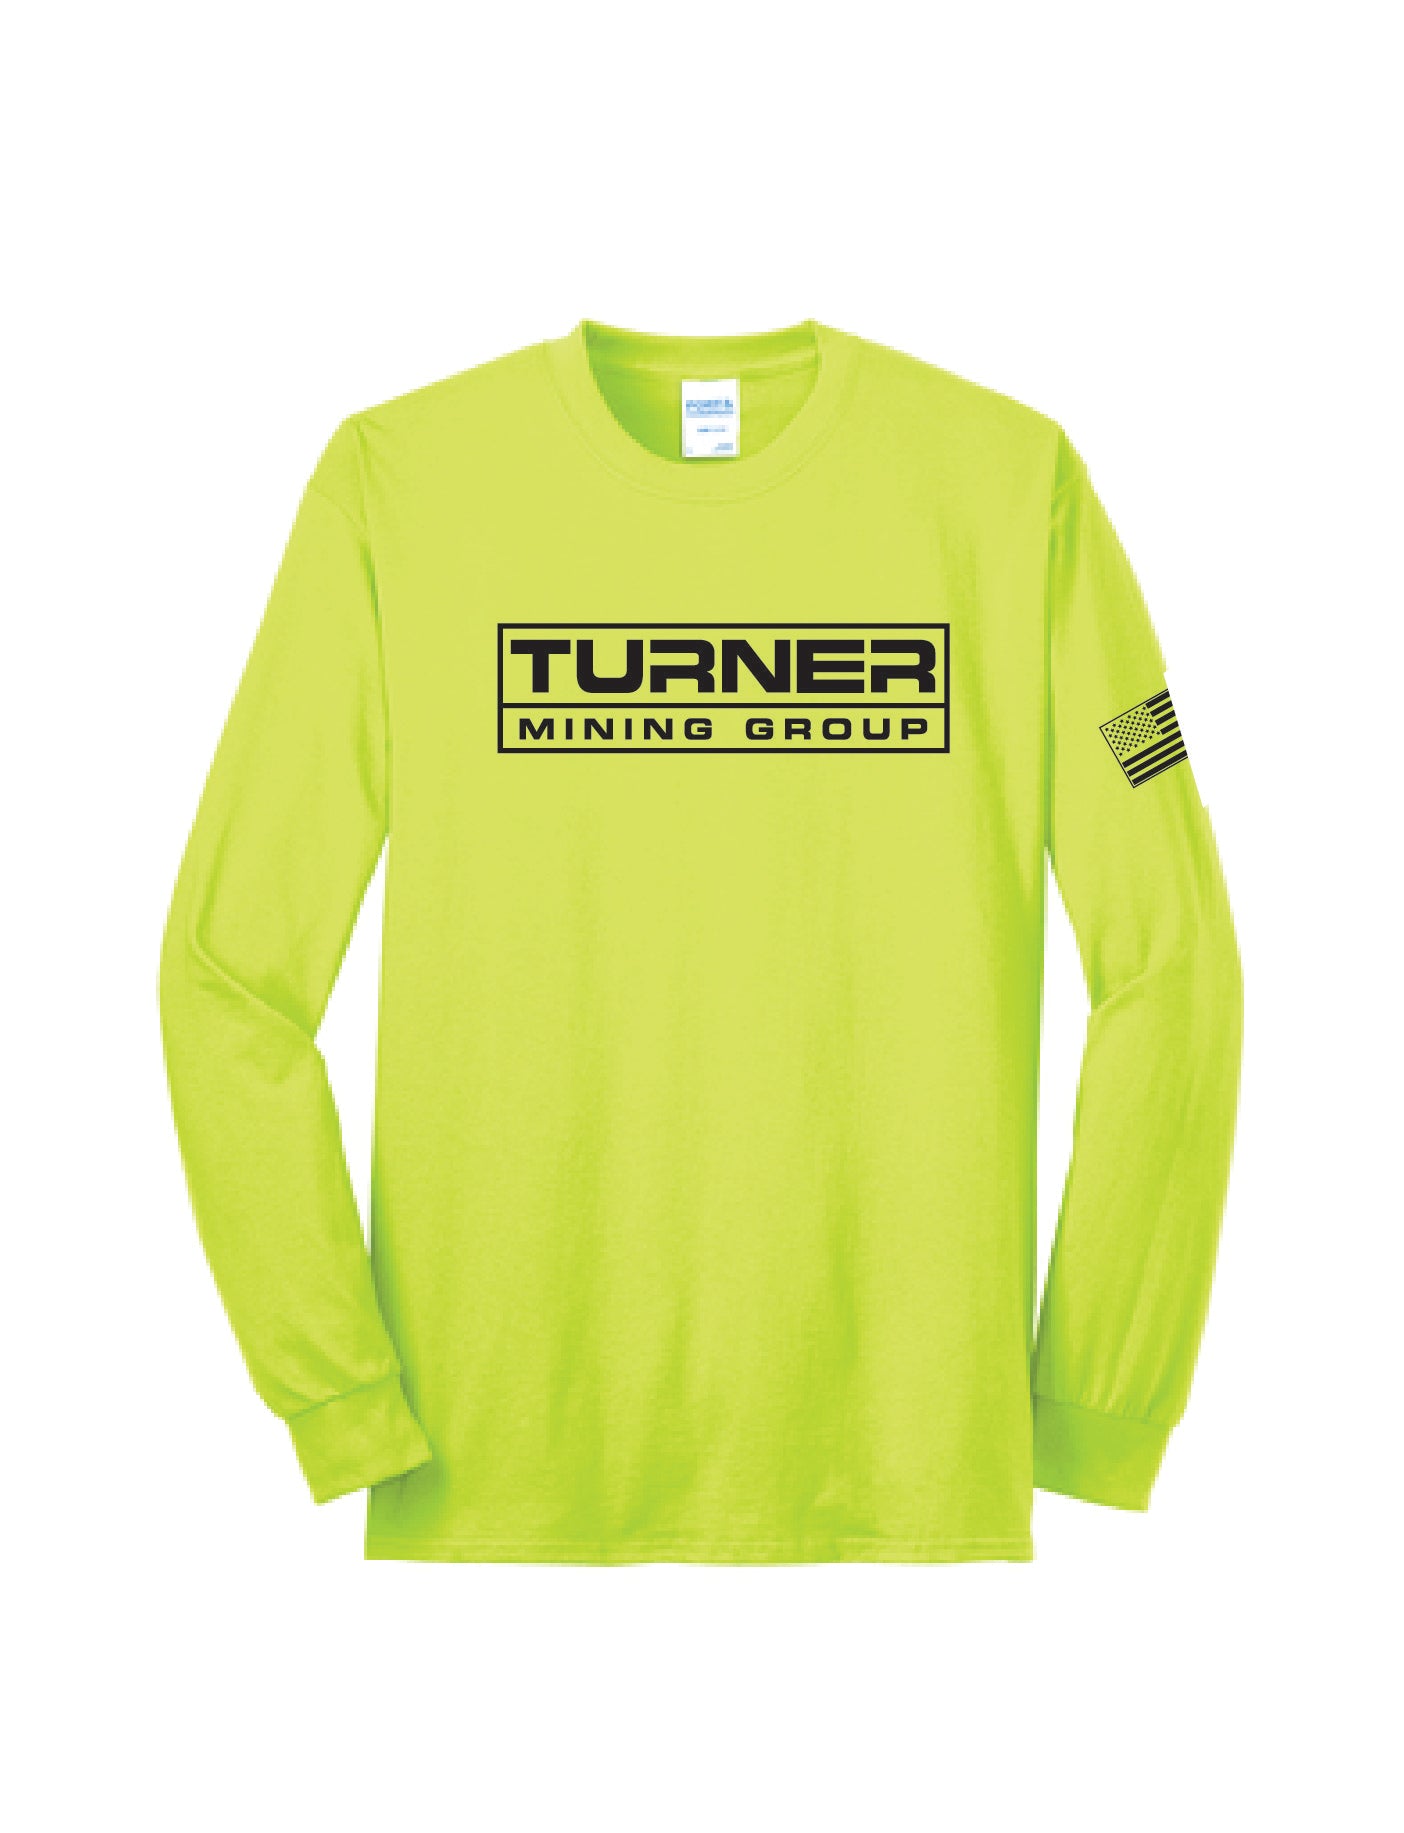 Safety Yellow High Vis Long Sleeve